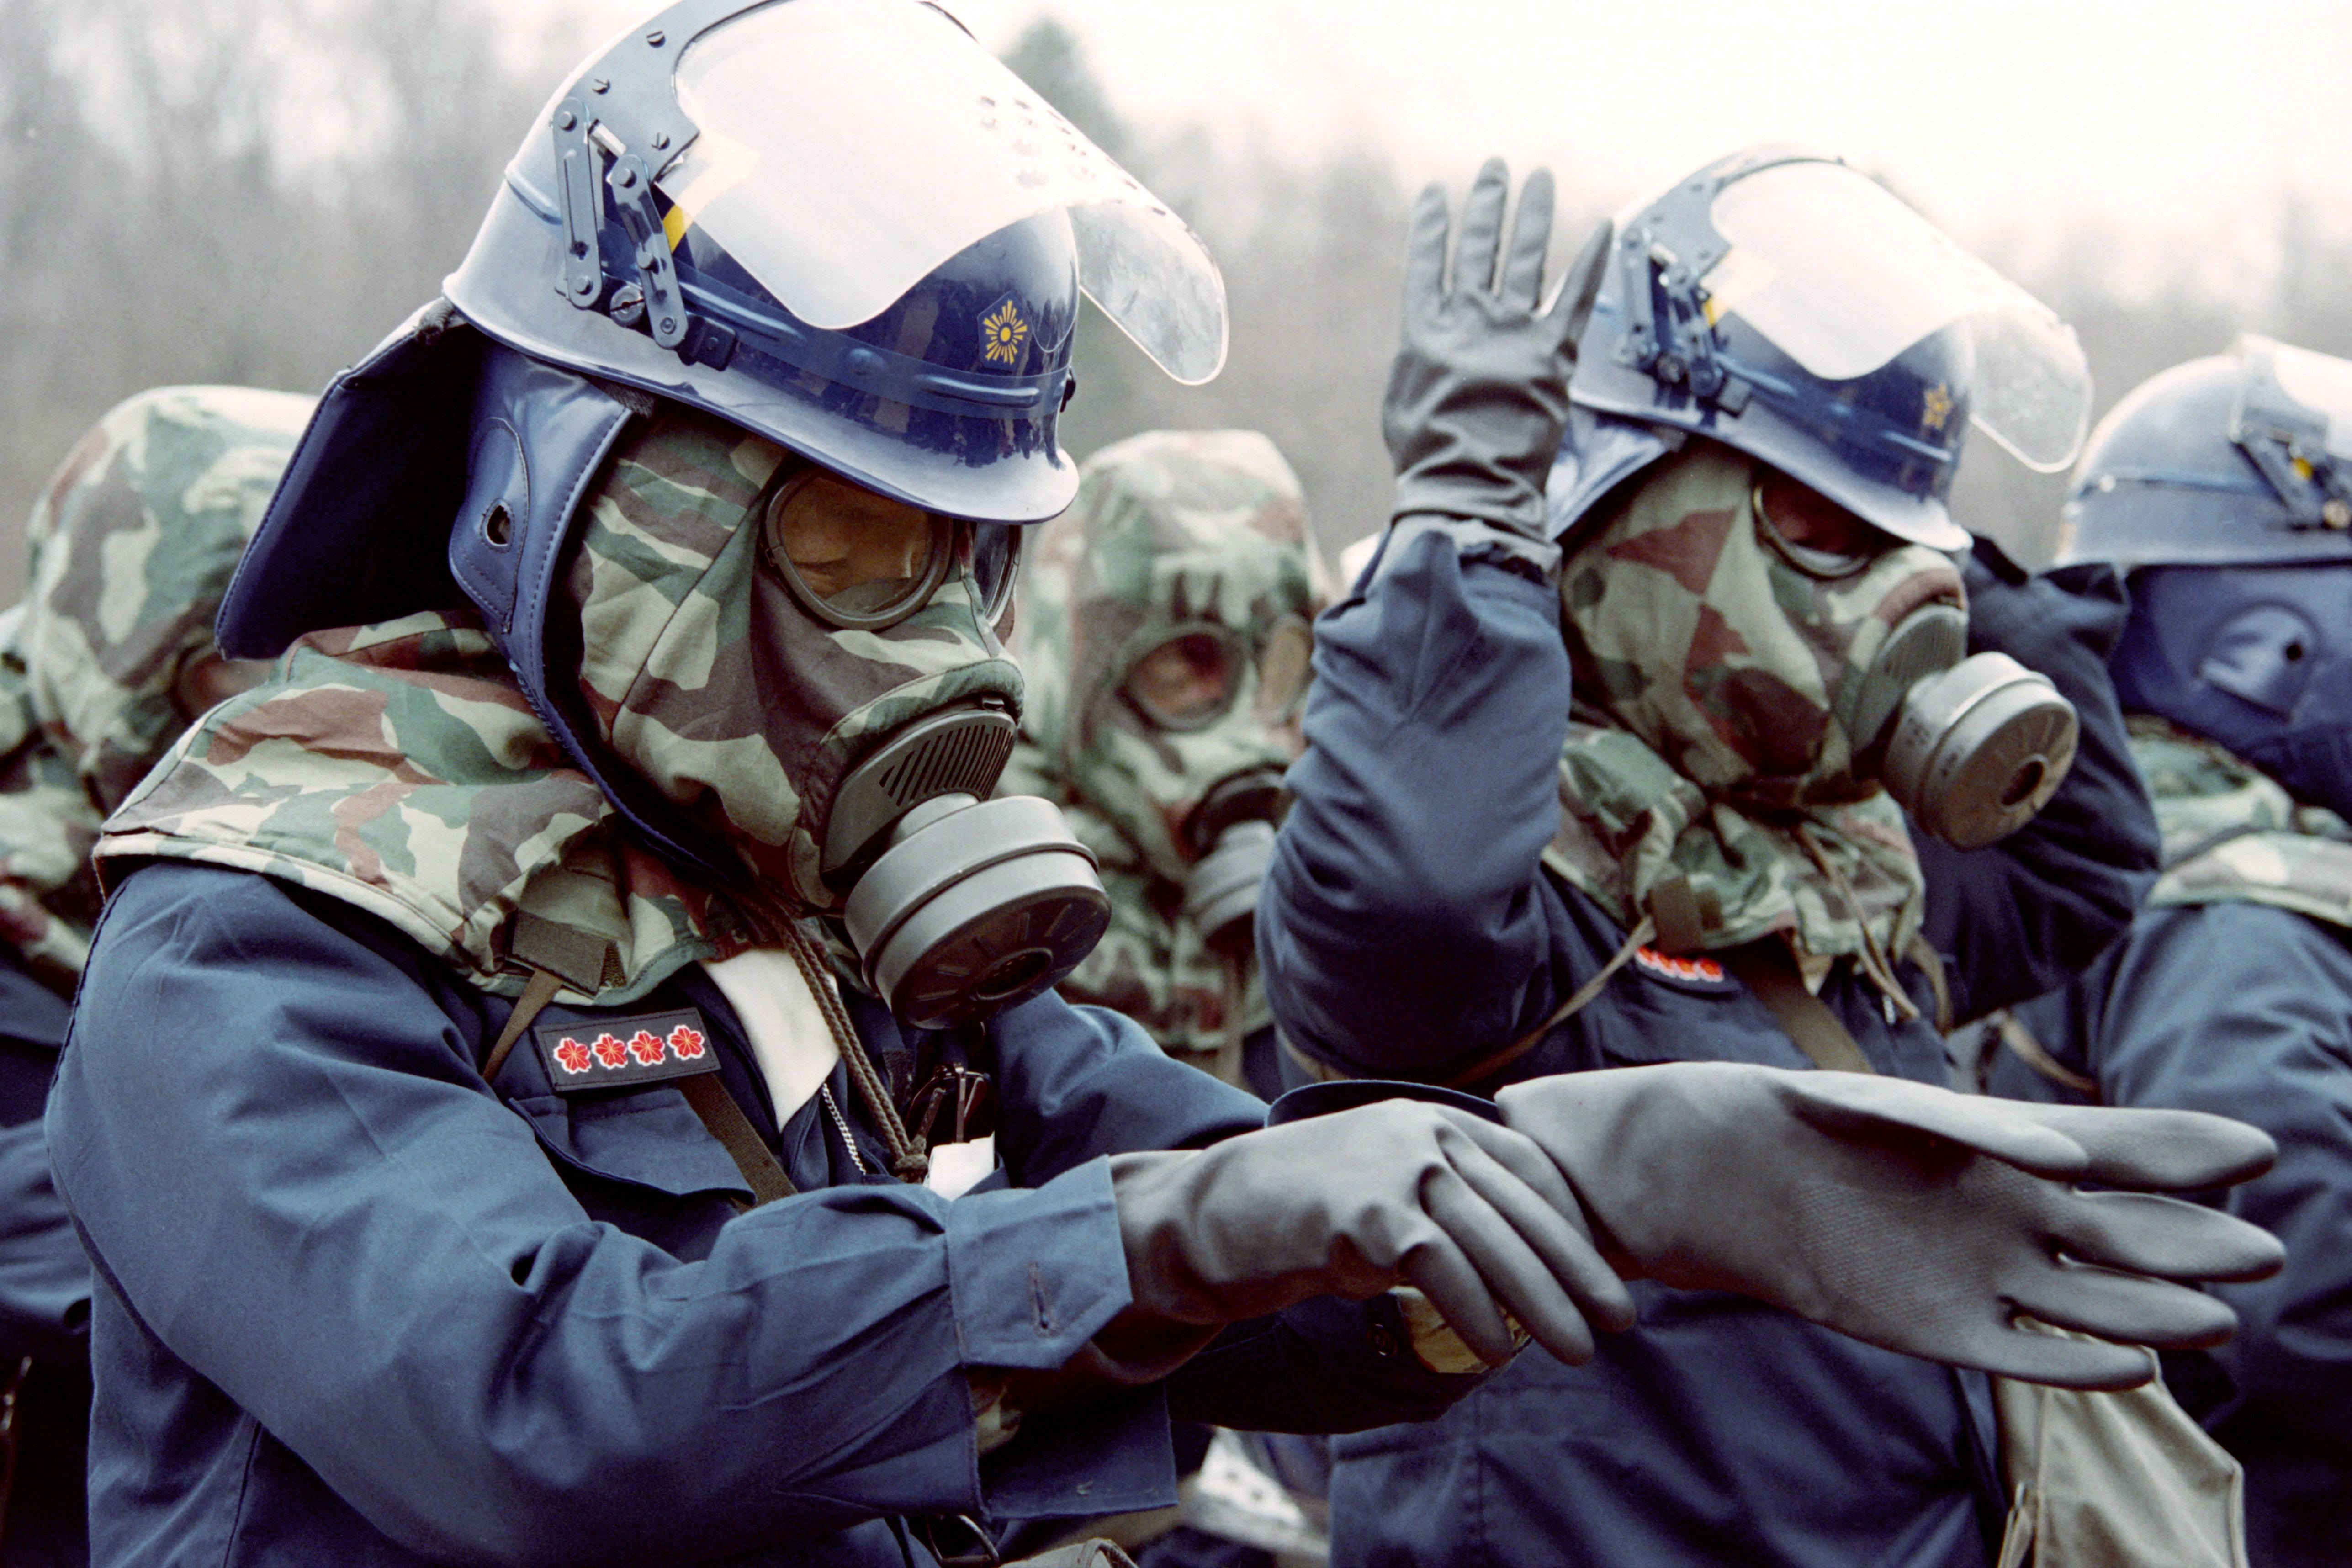 People wearing gas masks and anti-chemical gloves.